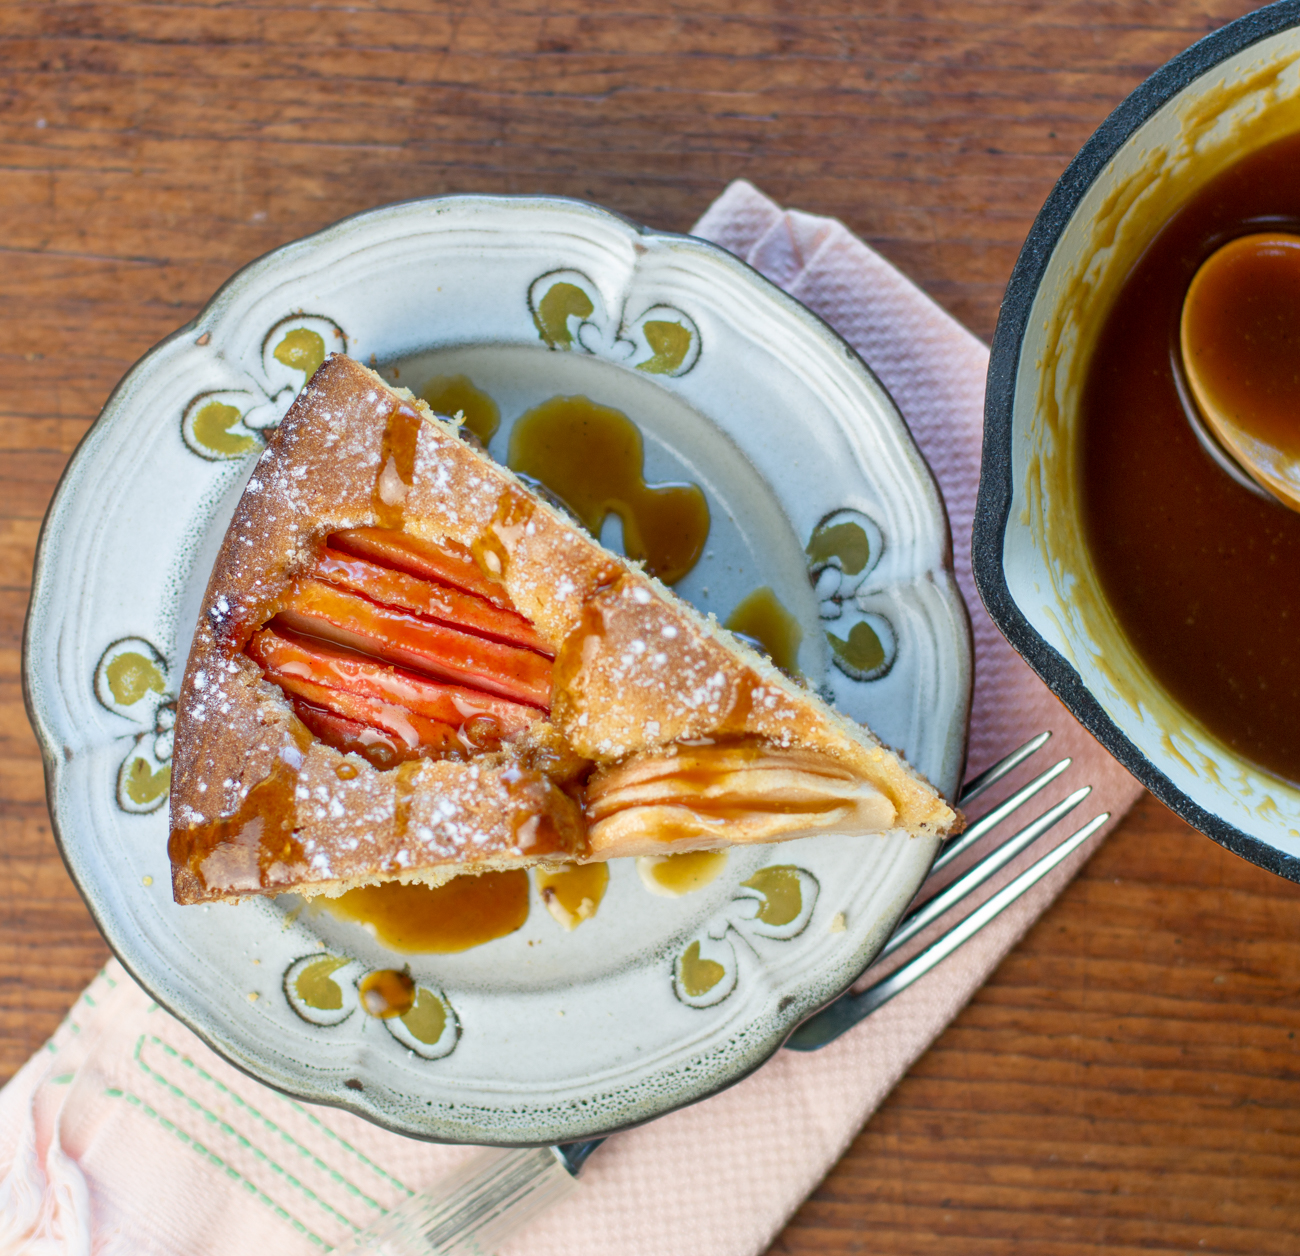 One slice of Karen's German Apple Cake with Pink Pearl Apples topped with Maple Caramel Sauce 